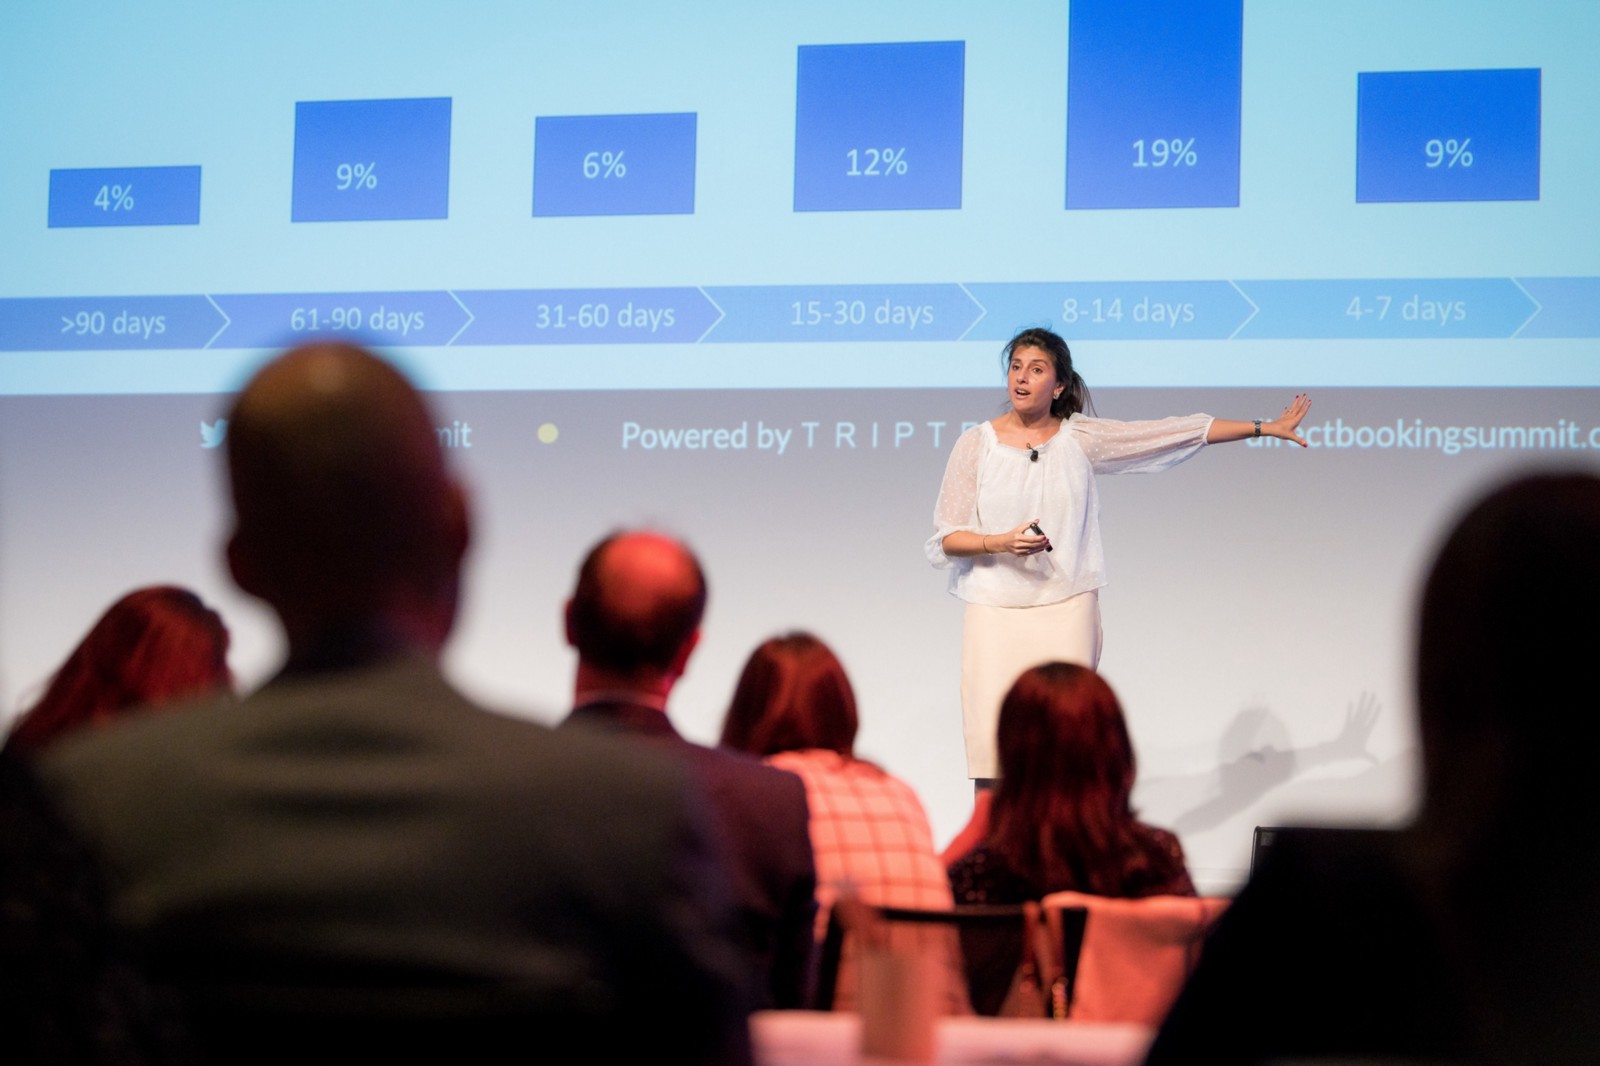 Geneviève Materne delivering one of the most engaging talks from at the Direct Booking Summit.